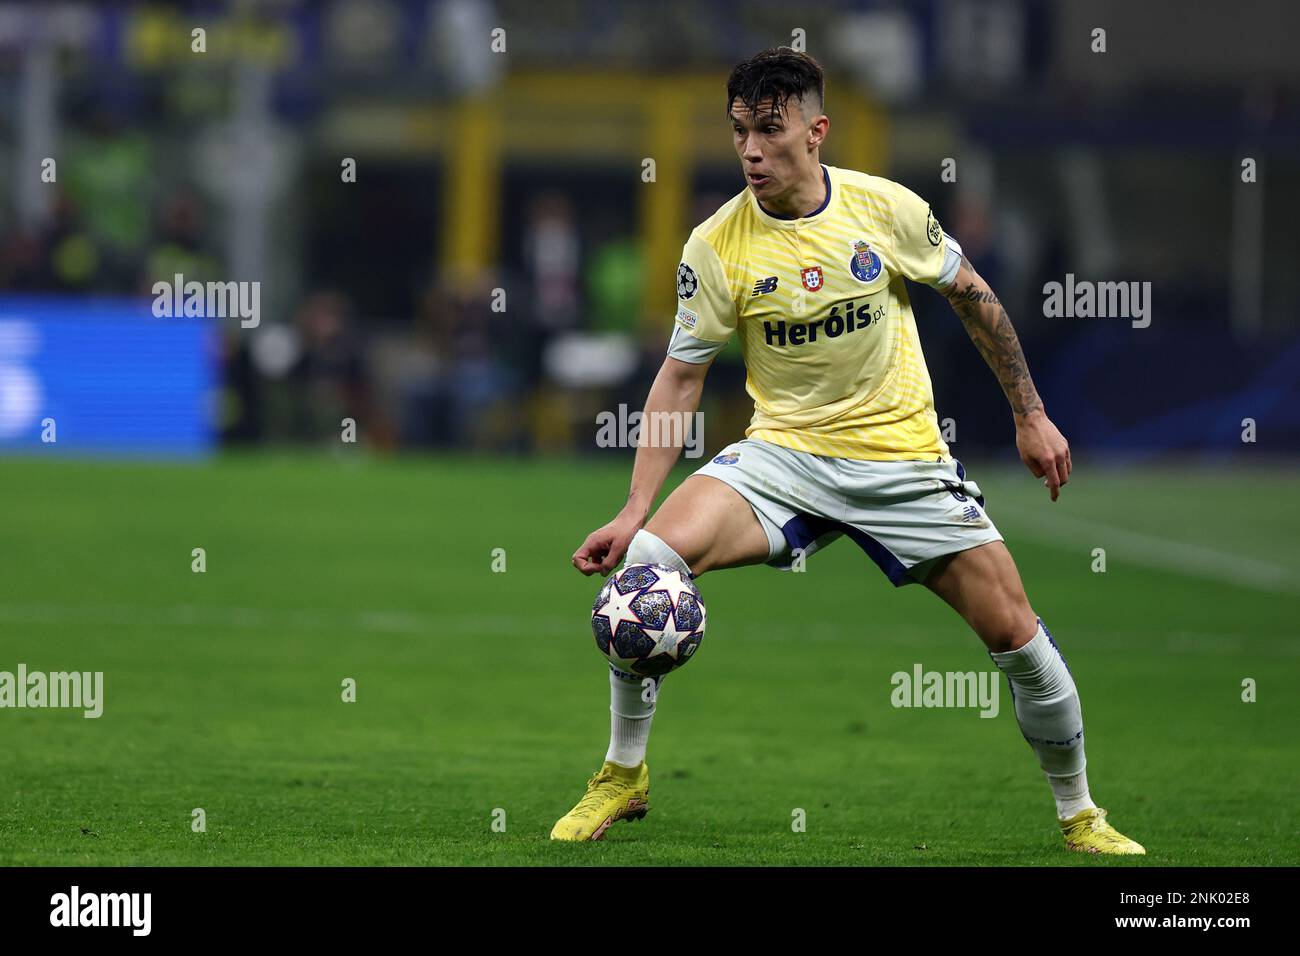 Milano Italy . February 22, 2023, Mateus Uribe of Fc Porto controls the ball during the Uefa Champions League round of 16 first leg match between Fc Internazionale and Fc Porto at Stadio Giuseppe Meazza on February 22, 2023 in Milano Italy . Stock Photo